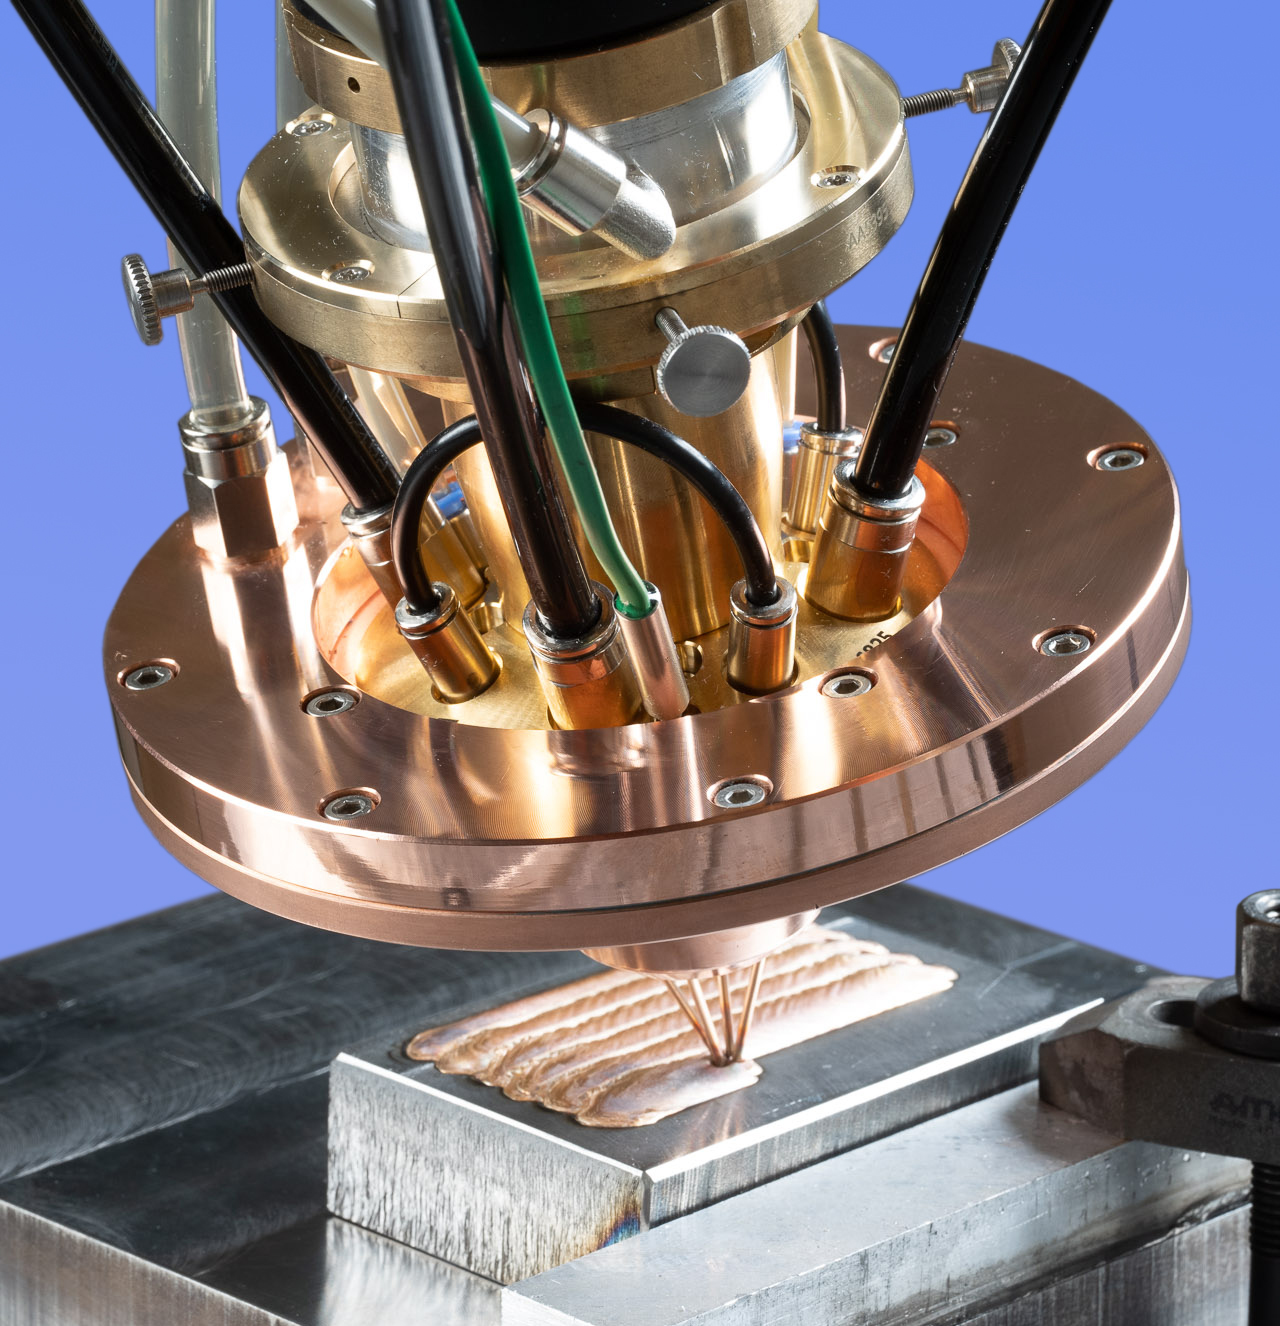 Four wires feed simultaneously to the center of the laser beam and ensure competitive deposition rates.